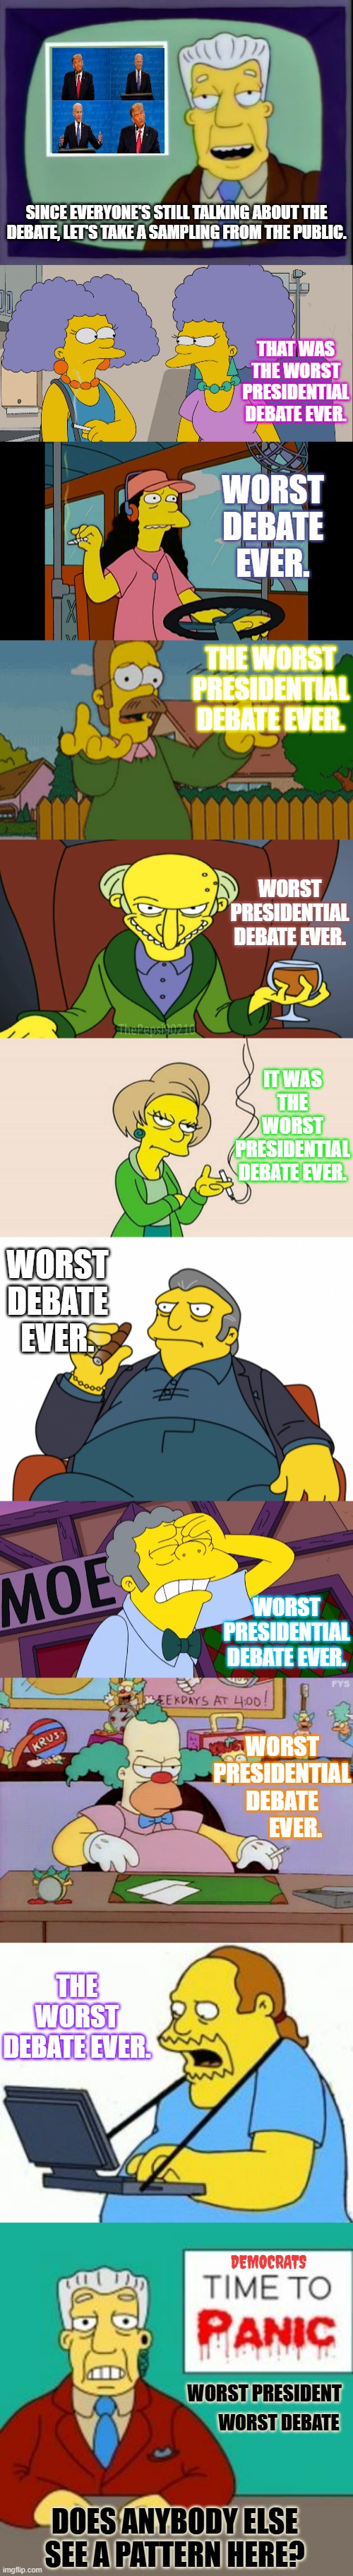 Opinions From The People | SINCE EVERYONE'S STILL TALKING ABOUT THE DEBATE, LET'S TAKE A SAMPLING FROM THE PUBLIC. THAT WAS THE WORST PRESIDENTIAL DEBATE EVER. WORST DEBATE EVER. THE WORST PRESIDENTIAL DEBATE EVER. WORST PRESIDENTIAL DEBATE EVER. IT WAS THE WORST PRESIDENTIAL DEBATE EVER. WORST DEBATE EVER. WORST PRESIDENTIAL DEBATE EVER. WORST PRESIDENTIAL DEBATE       EVER. THE WORST DEBATE EVER. DEMOCRATS; WORST PRESIDENT; WORST DEBATE; DOES ANYBODY ELSE SEE A PATTERN HERE? | image tagged in kent brockman,presidential debate,public,opinion,see,pattern | made w/ Imgflip meme maker